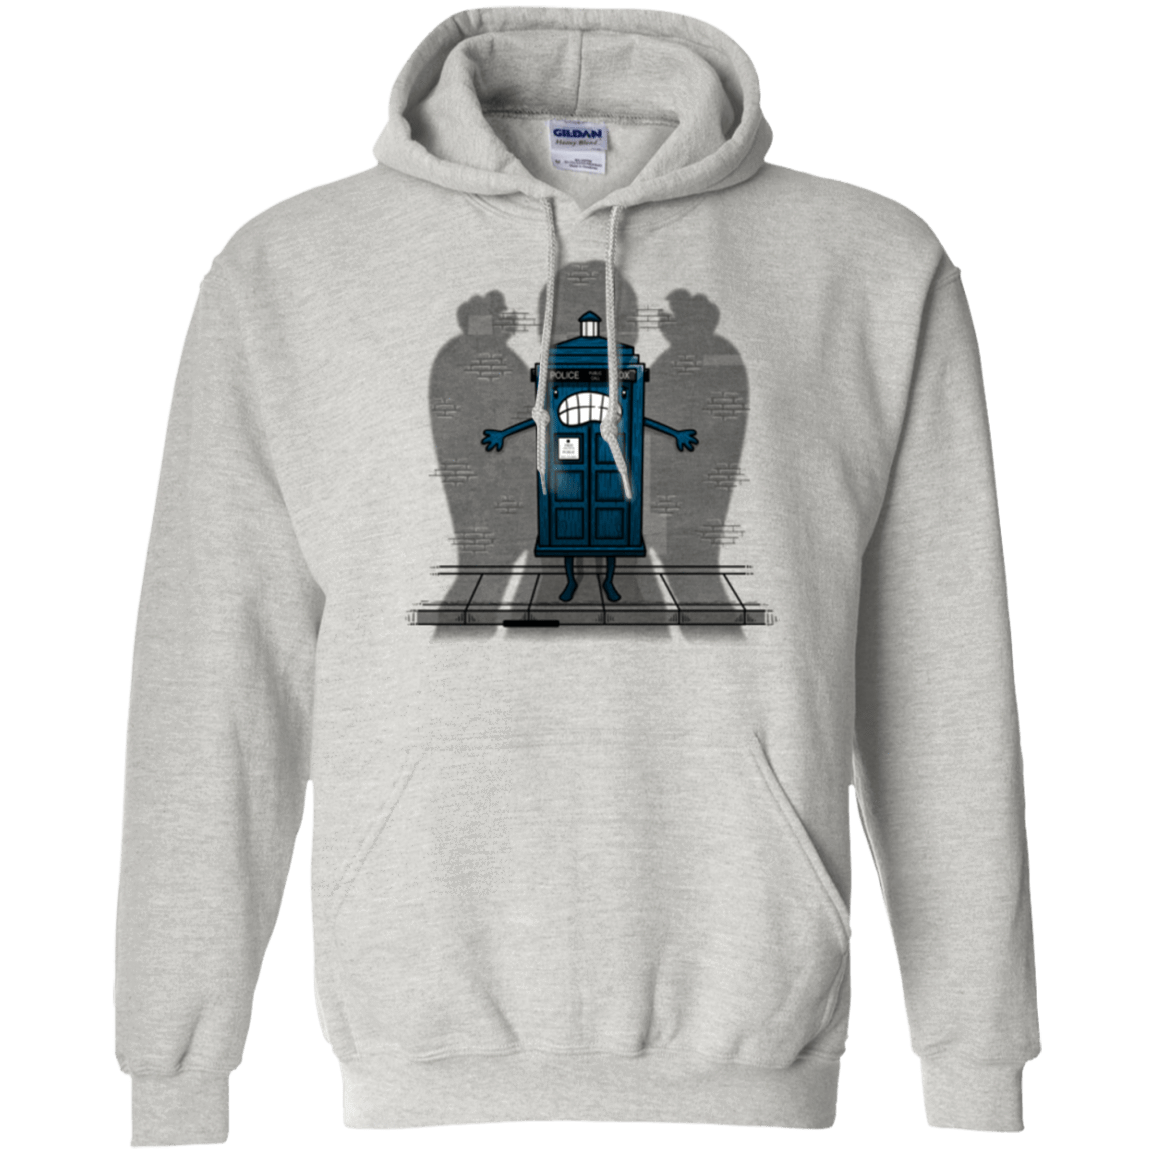 Sweatshirts Ash / Small Angels Are Here Pullover Hoodie